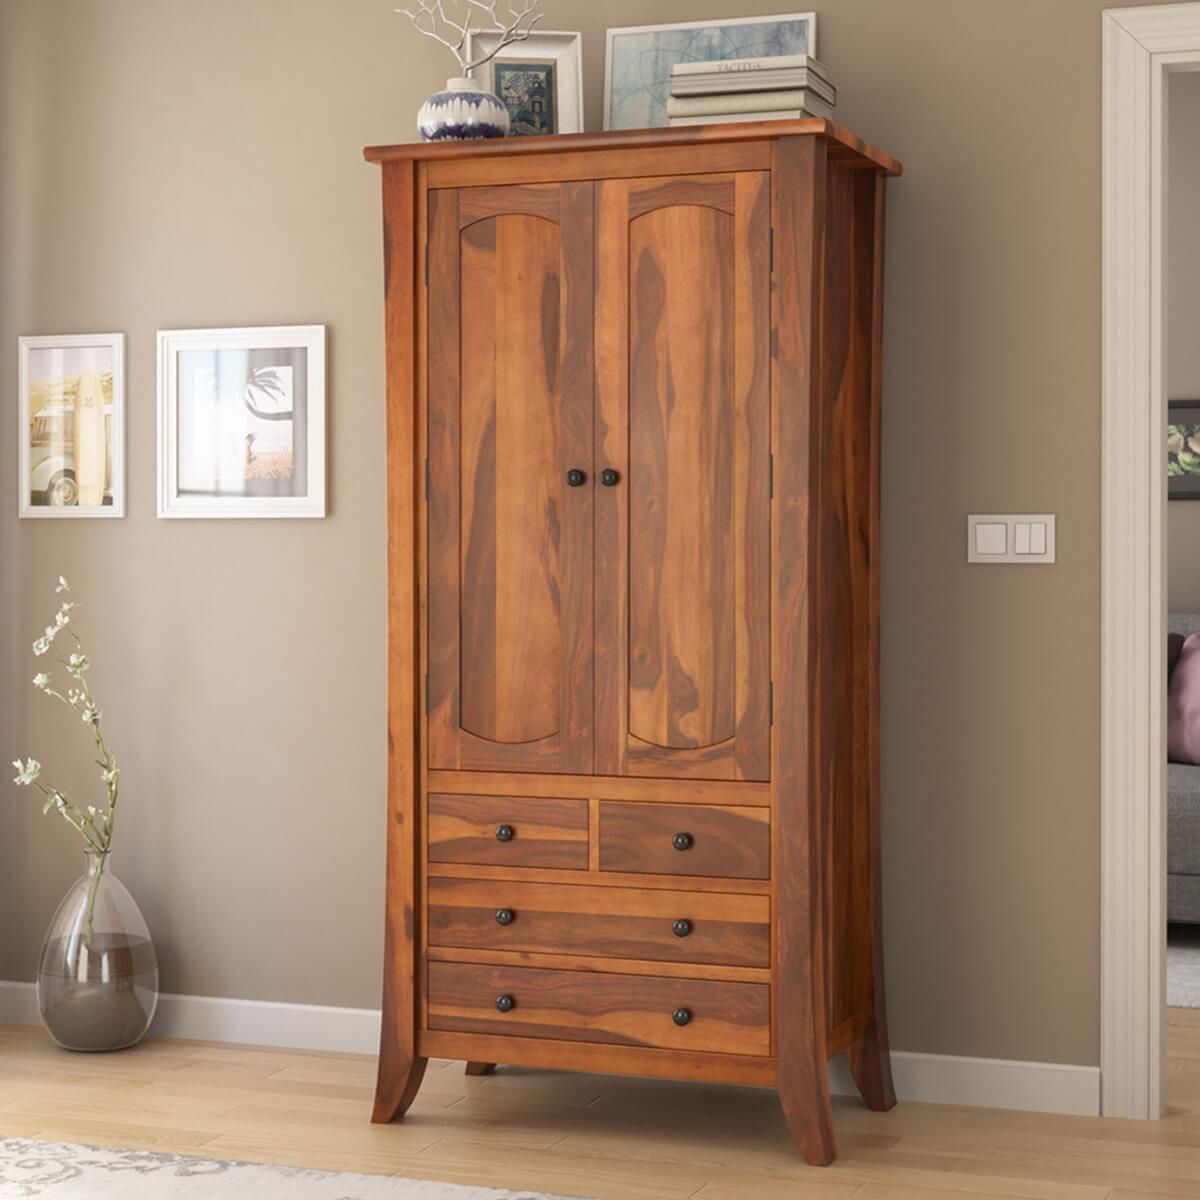 Georgia Rustic Solid Wood Wardrobe Armoire Closet With 4 Drawers In Cheap Solid Wood Wardrobes (Photo 3 of 11)